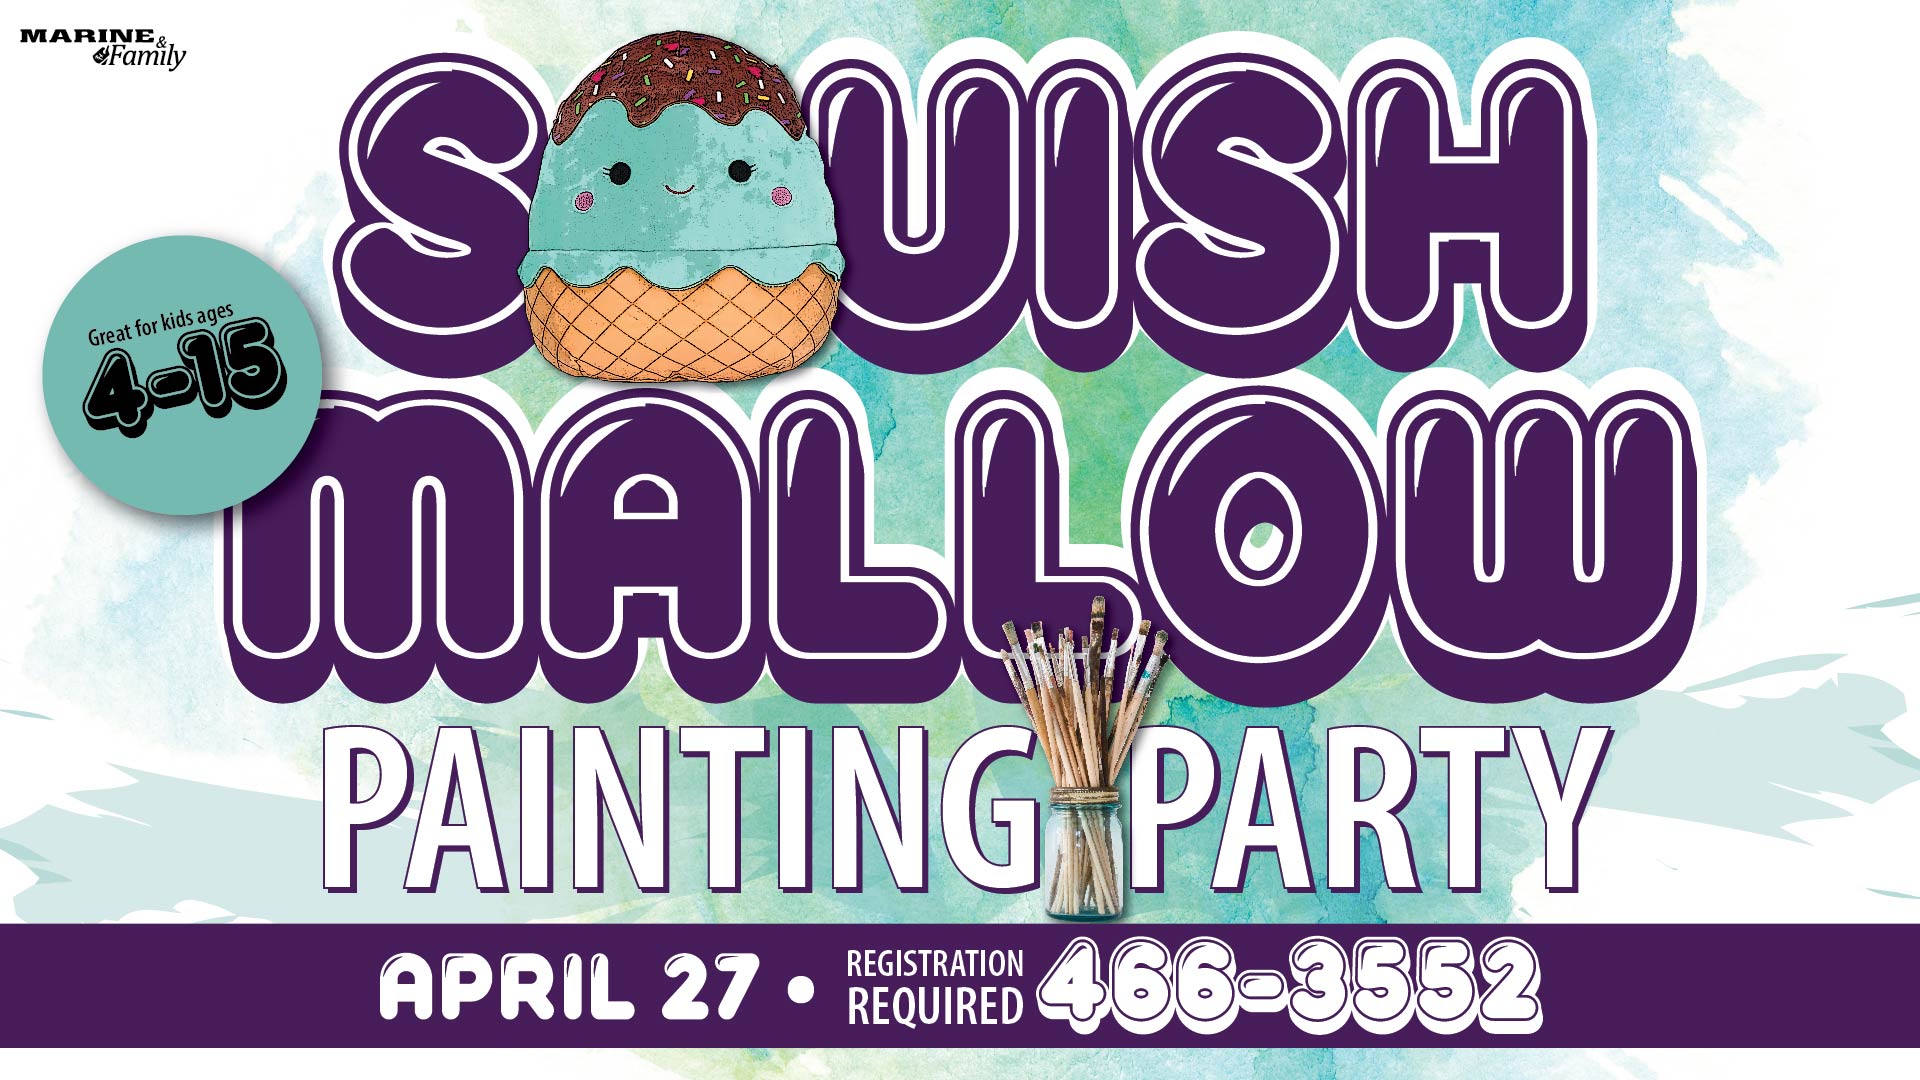 Squishmallow Painting Party